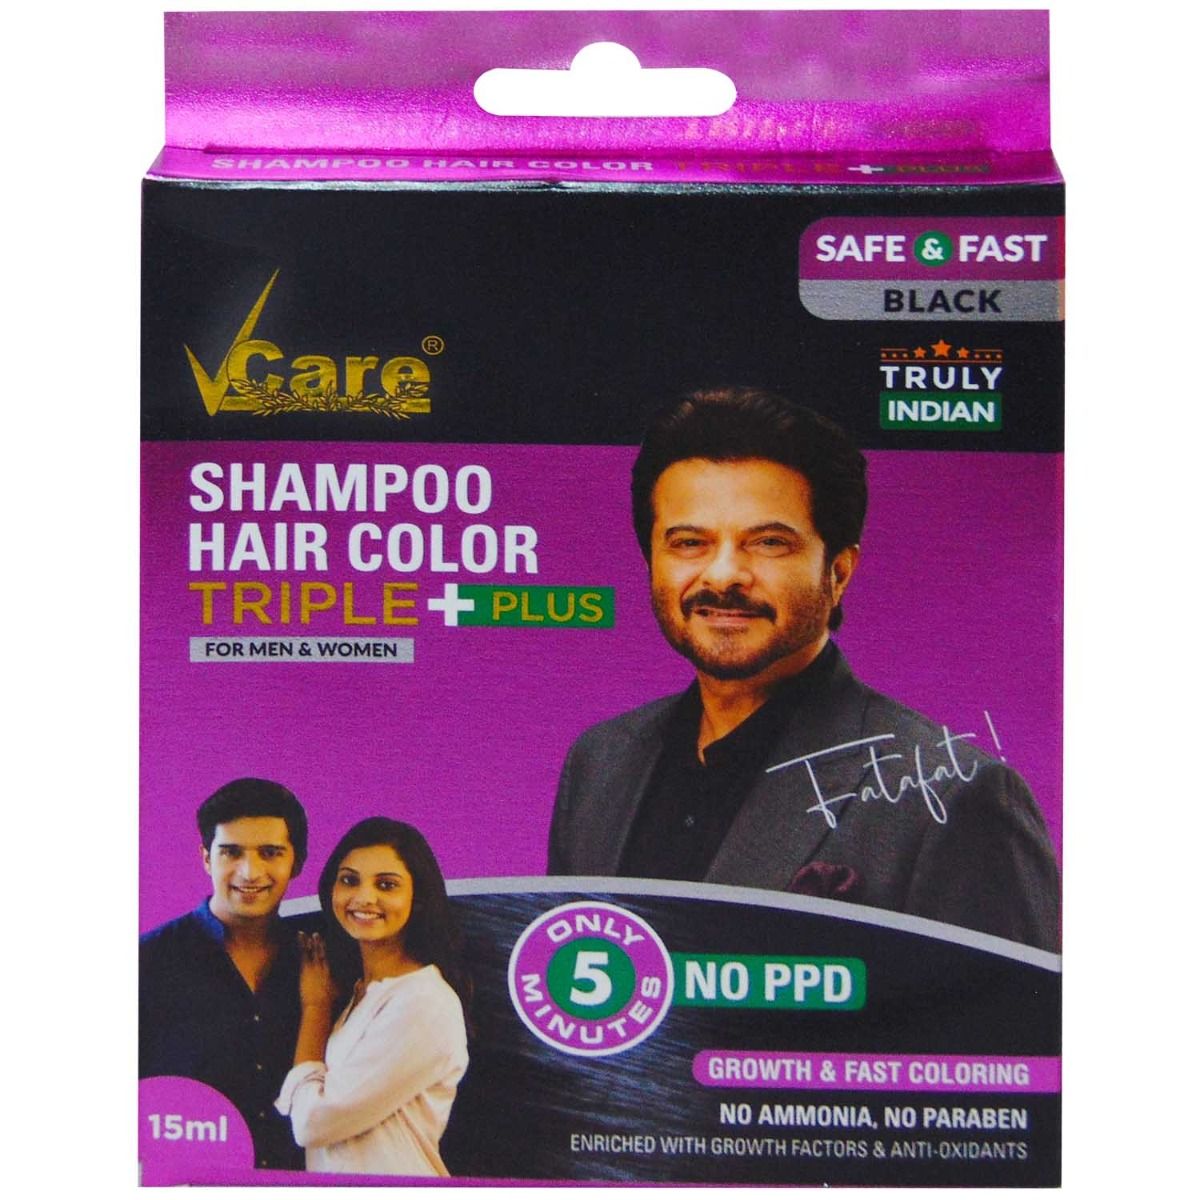 Godrej Expert Easy 5 minute Hair Colour Shampoo Based Natural Black, 20 ml  Price, Uses, Side Effects, Composition - Apollo Pharmacy